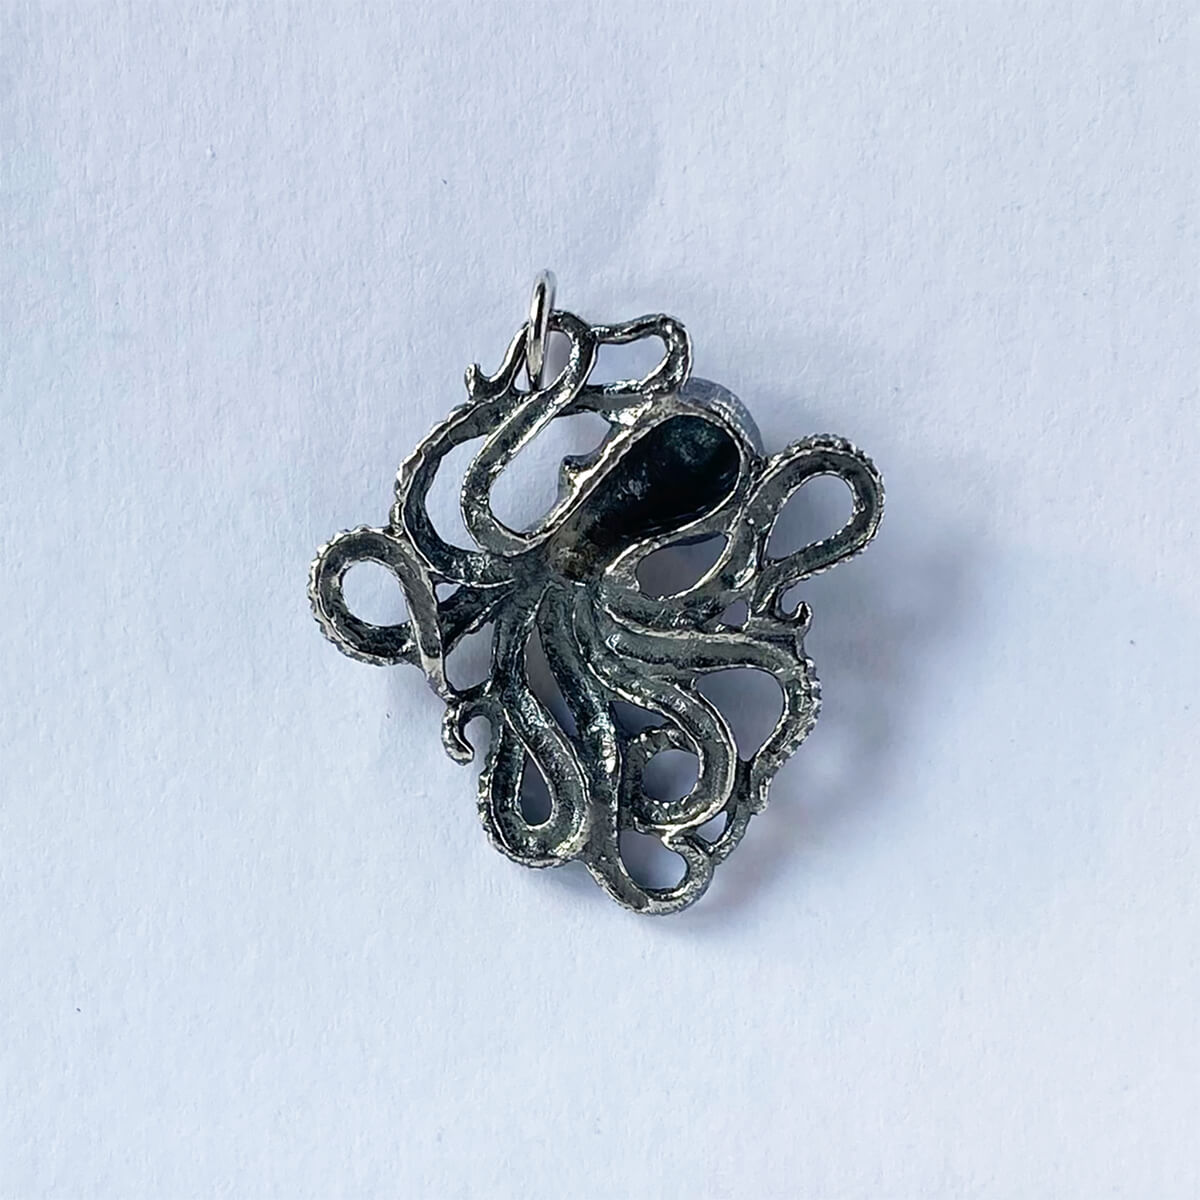 Rear view of a sterling silver octopus pendant